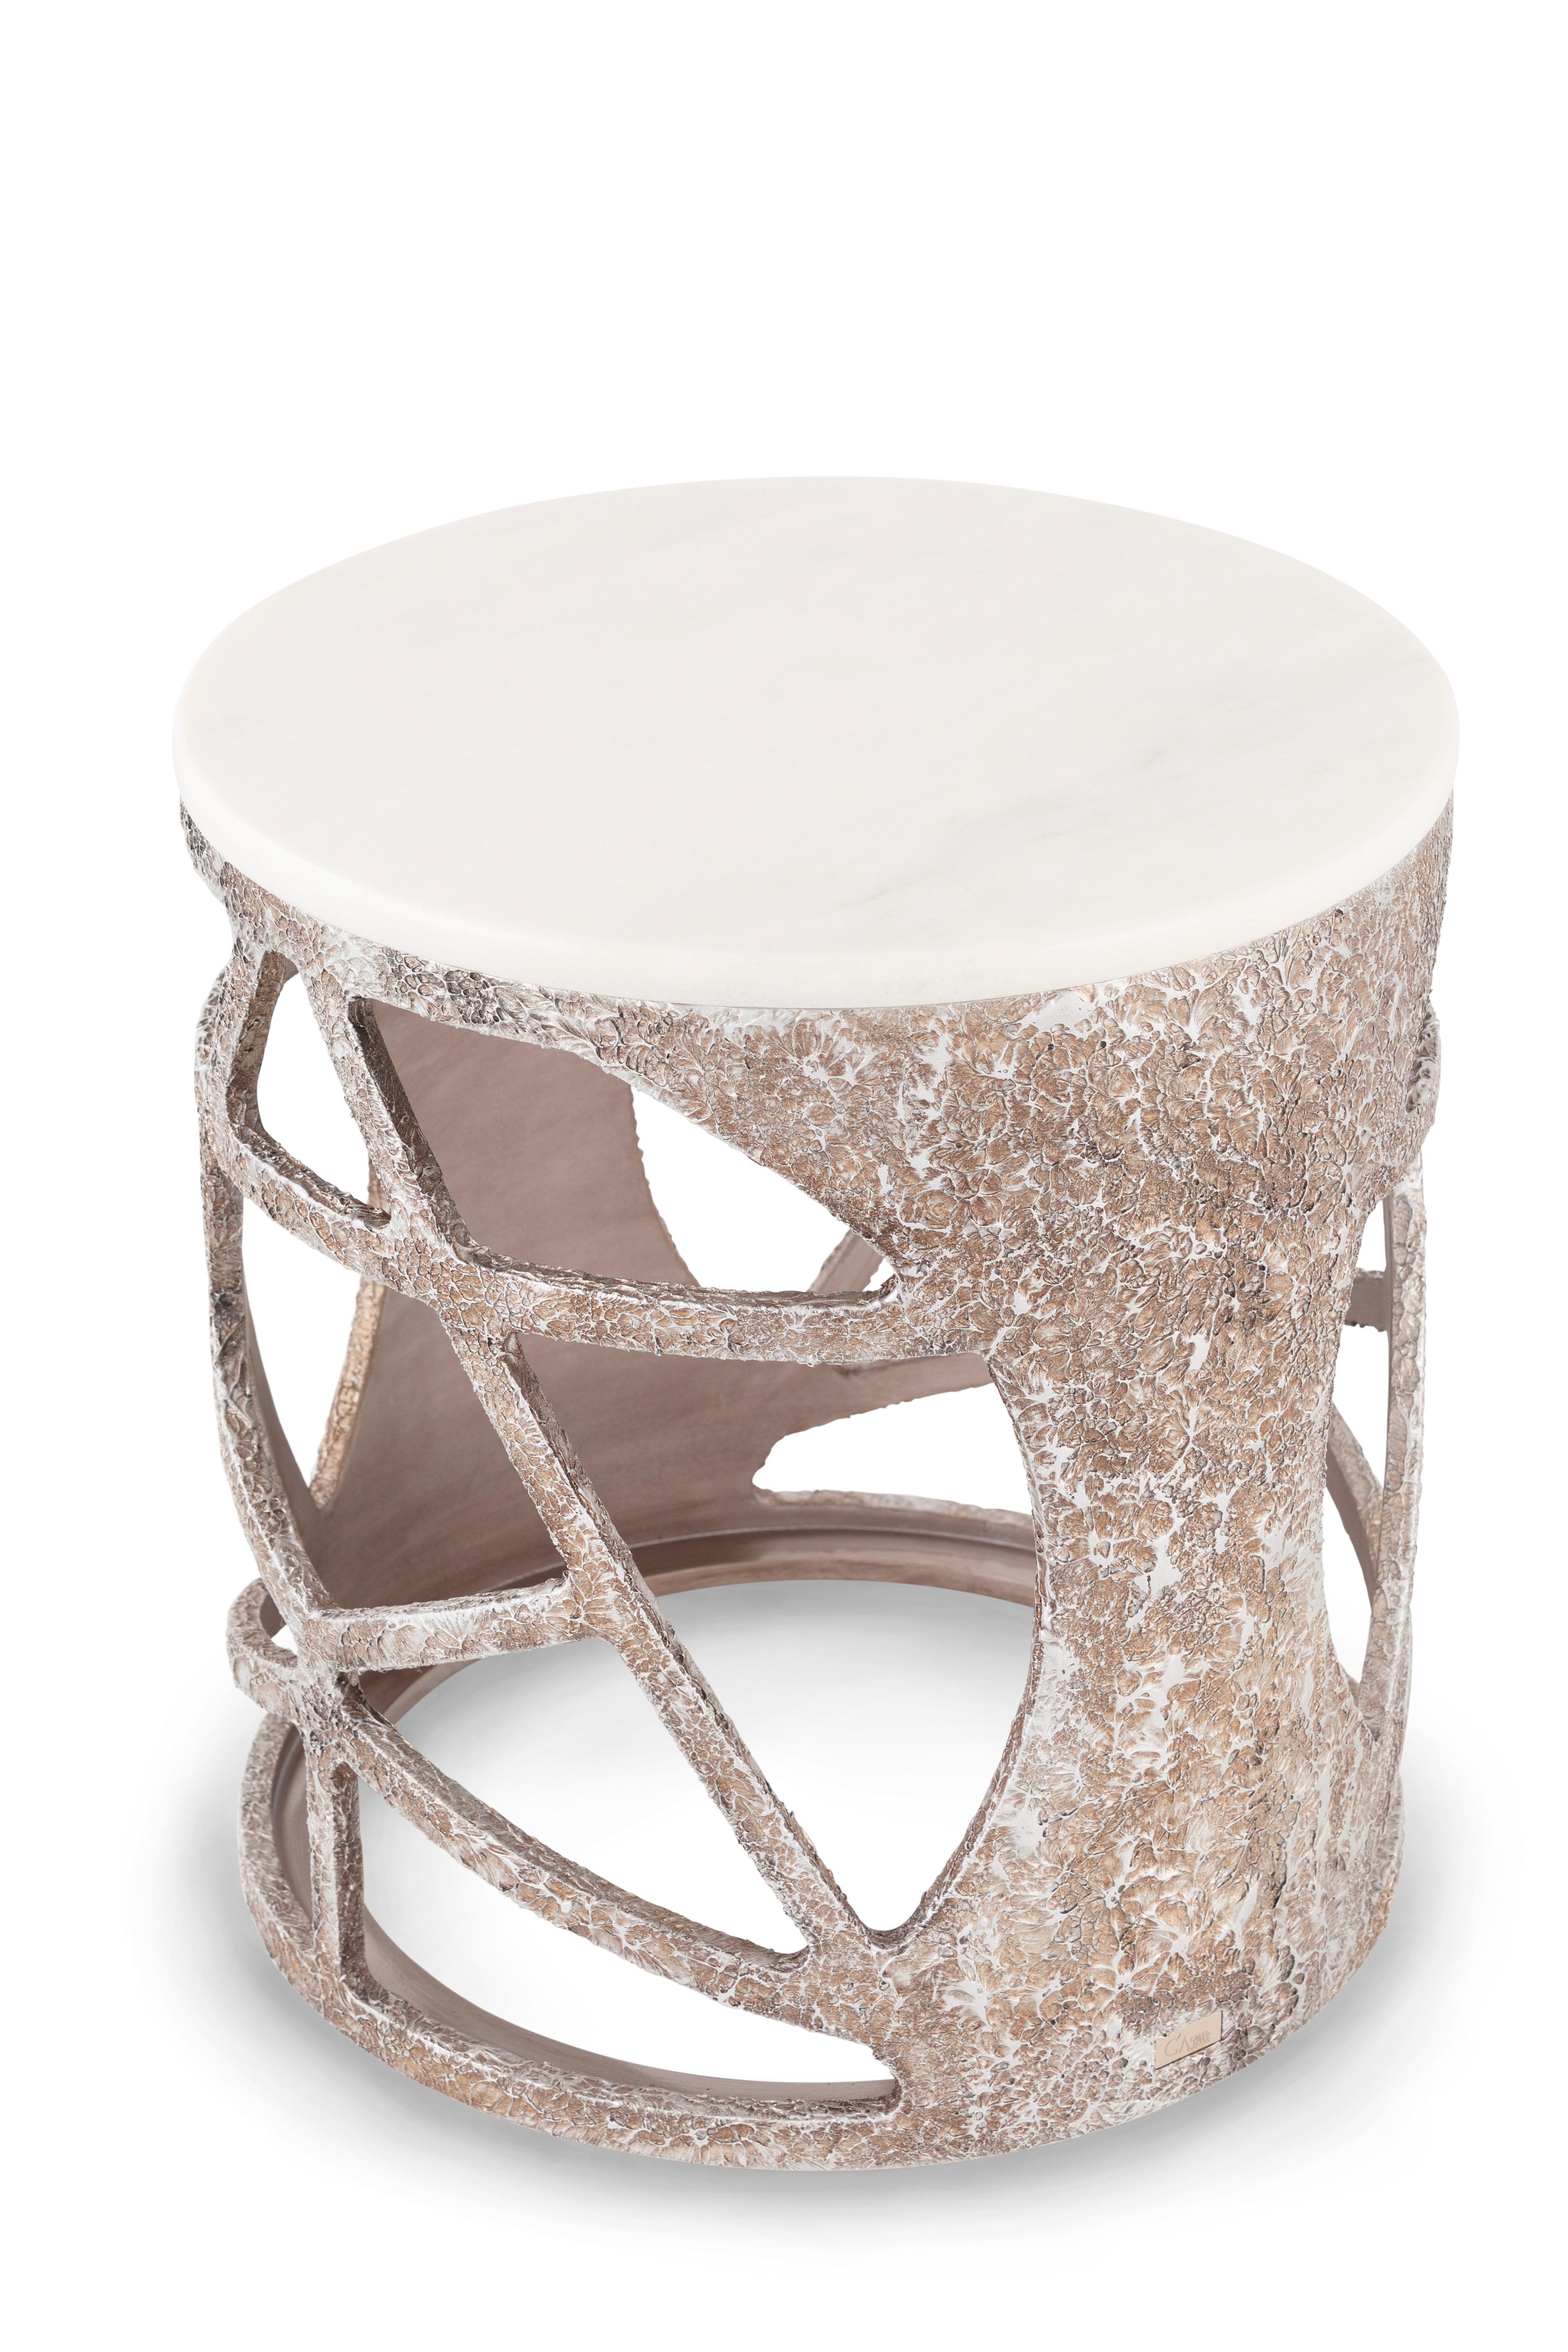 Pyrite side table, Modern Collection, Handcrafted in Portugal - Europe by GF Modern.

The Pyrite side table draws inspiration from the captivating allure of pyrite crystals, effortlessly drawing the eye to its elegant and noble design. Crafted to be